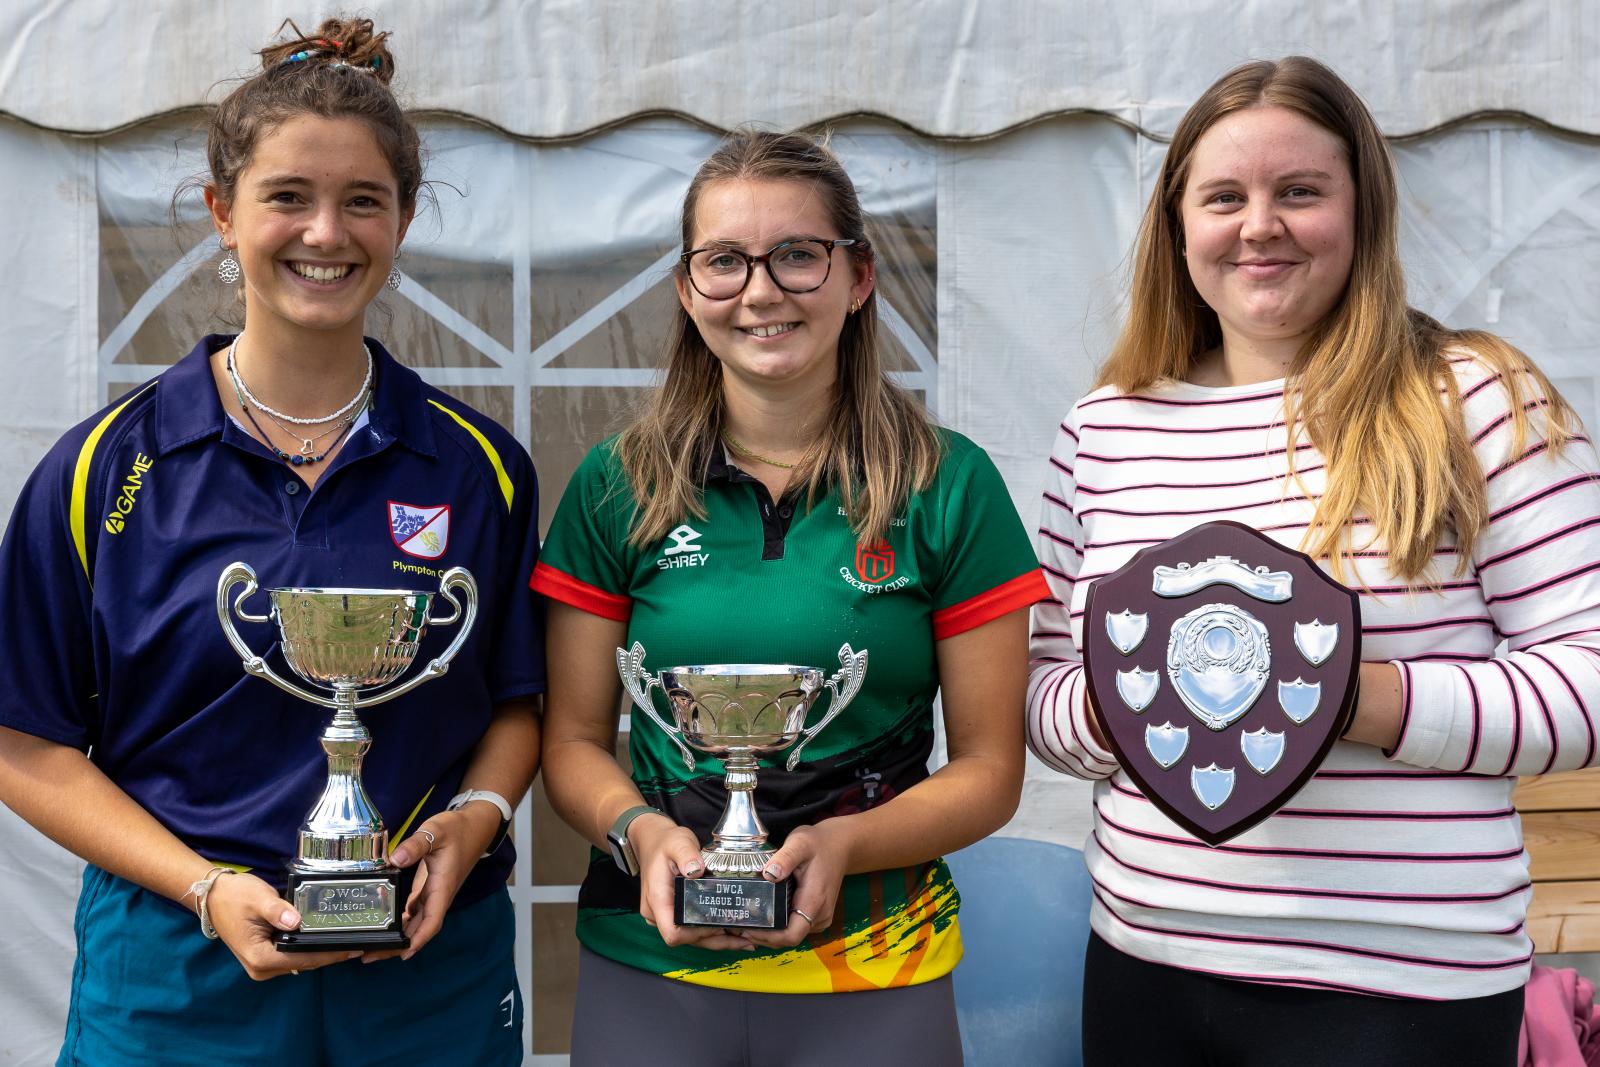 Devon Women's Cricket League join the Devon Cricket Board for finals day and a chance for celebration